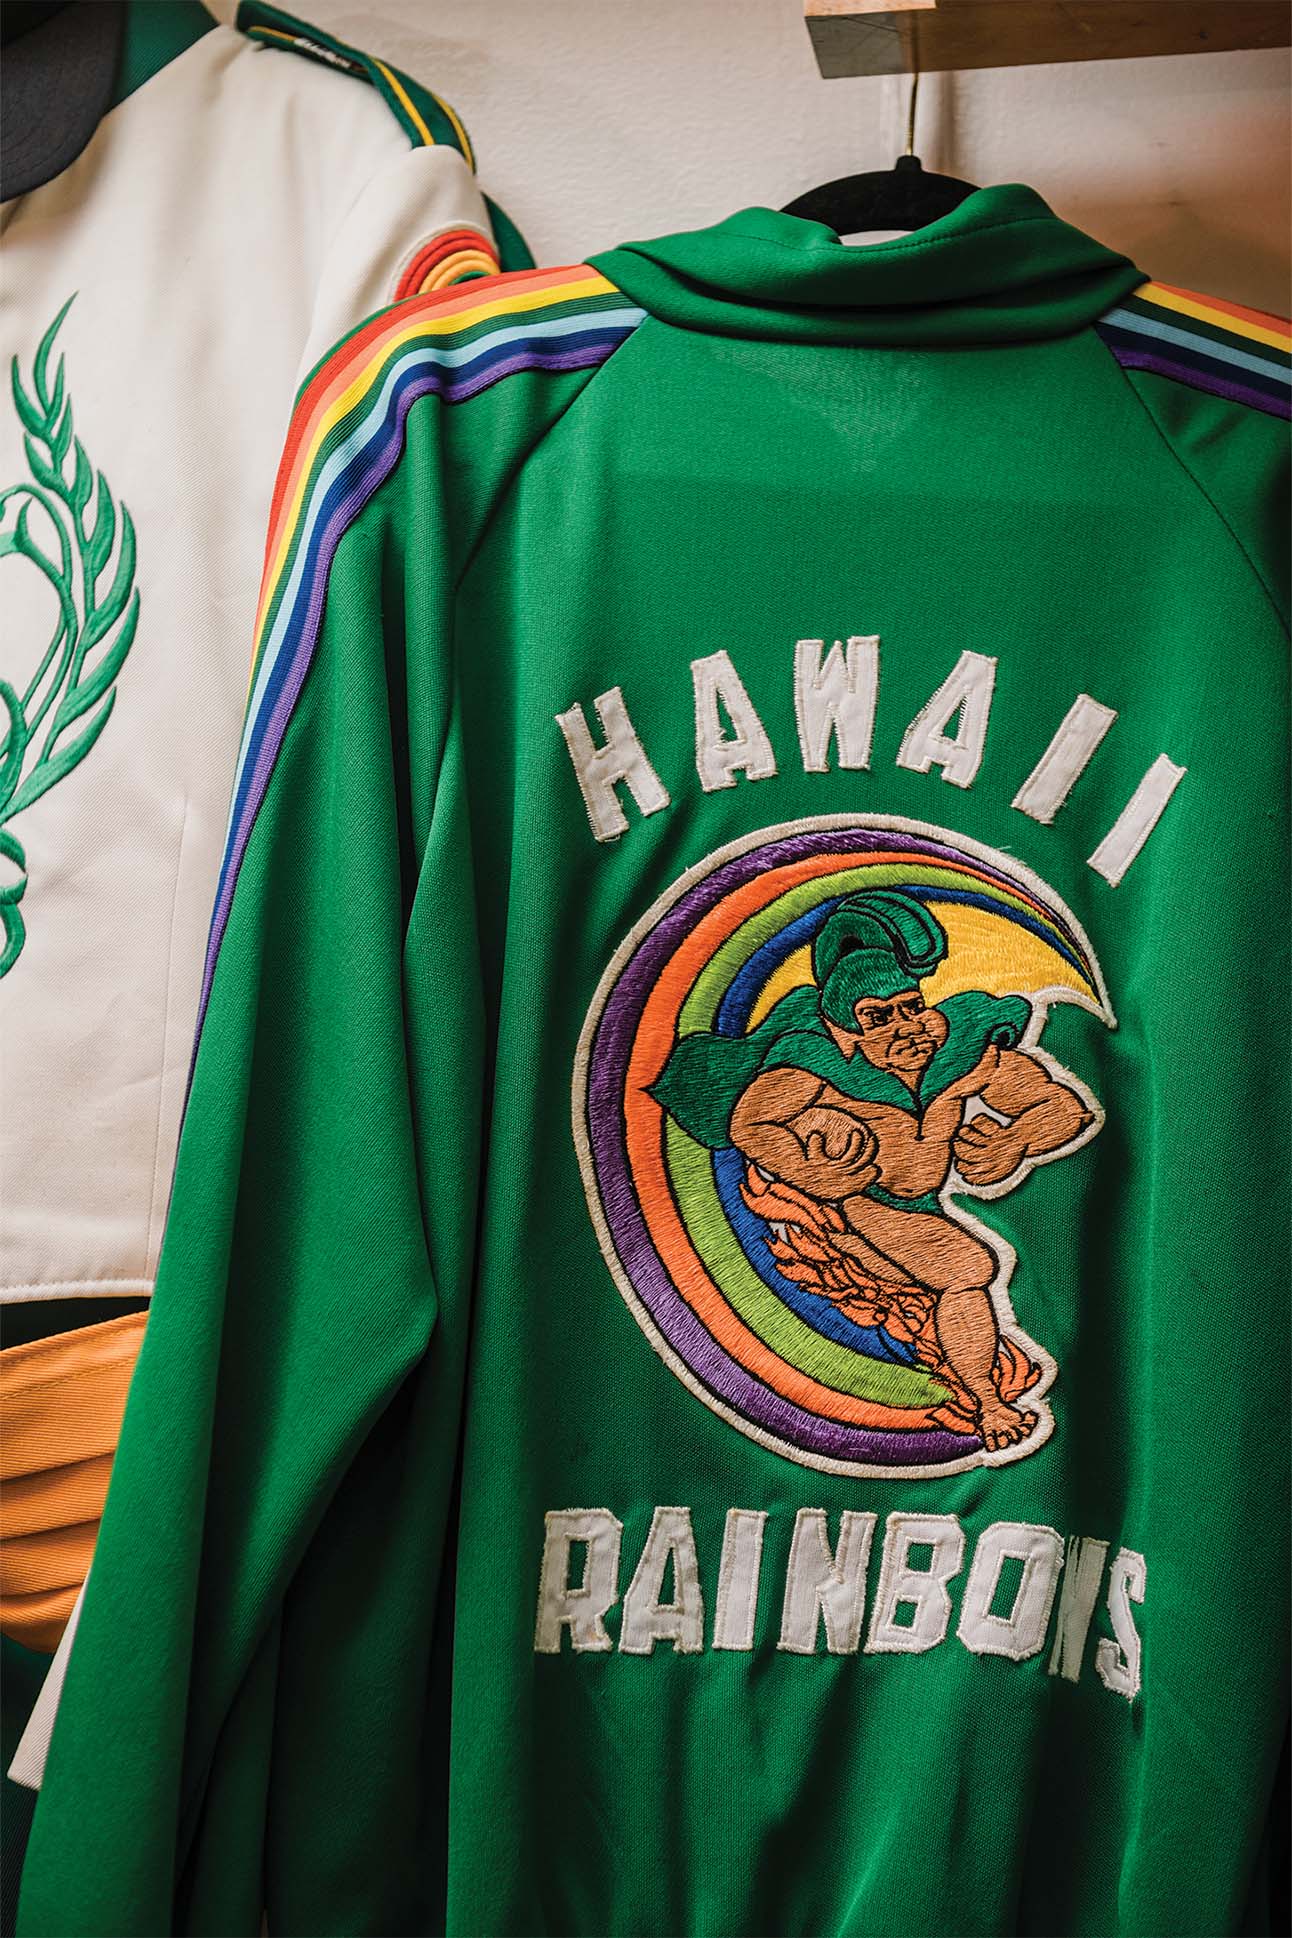 a green jacket with a rainbow design